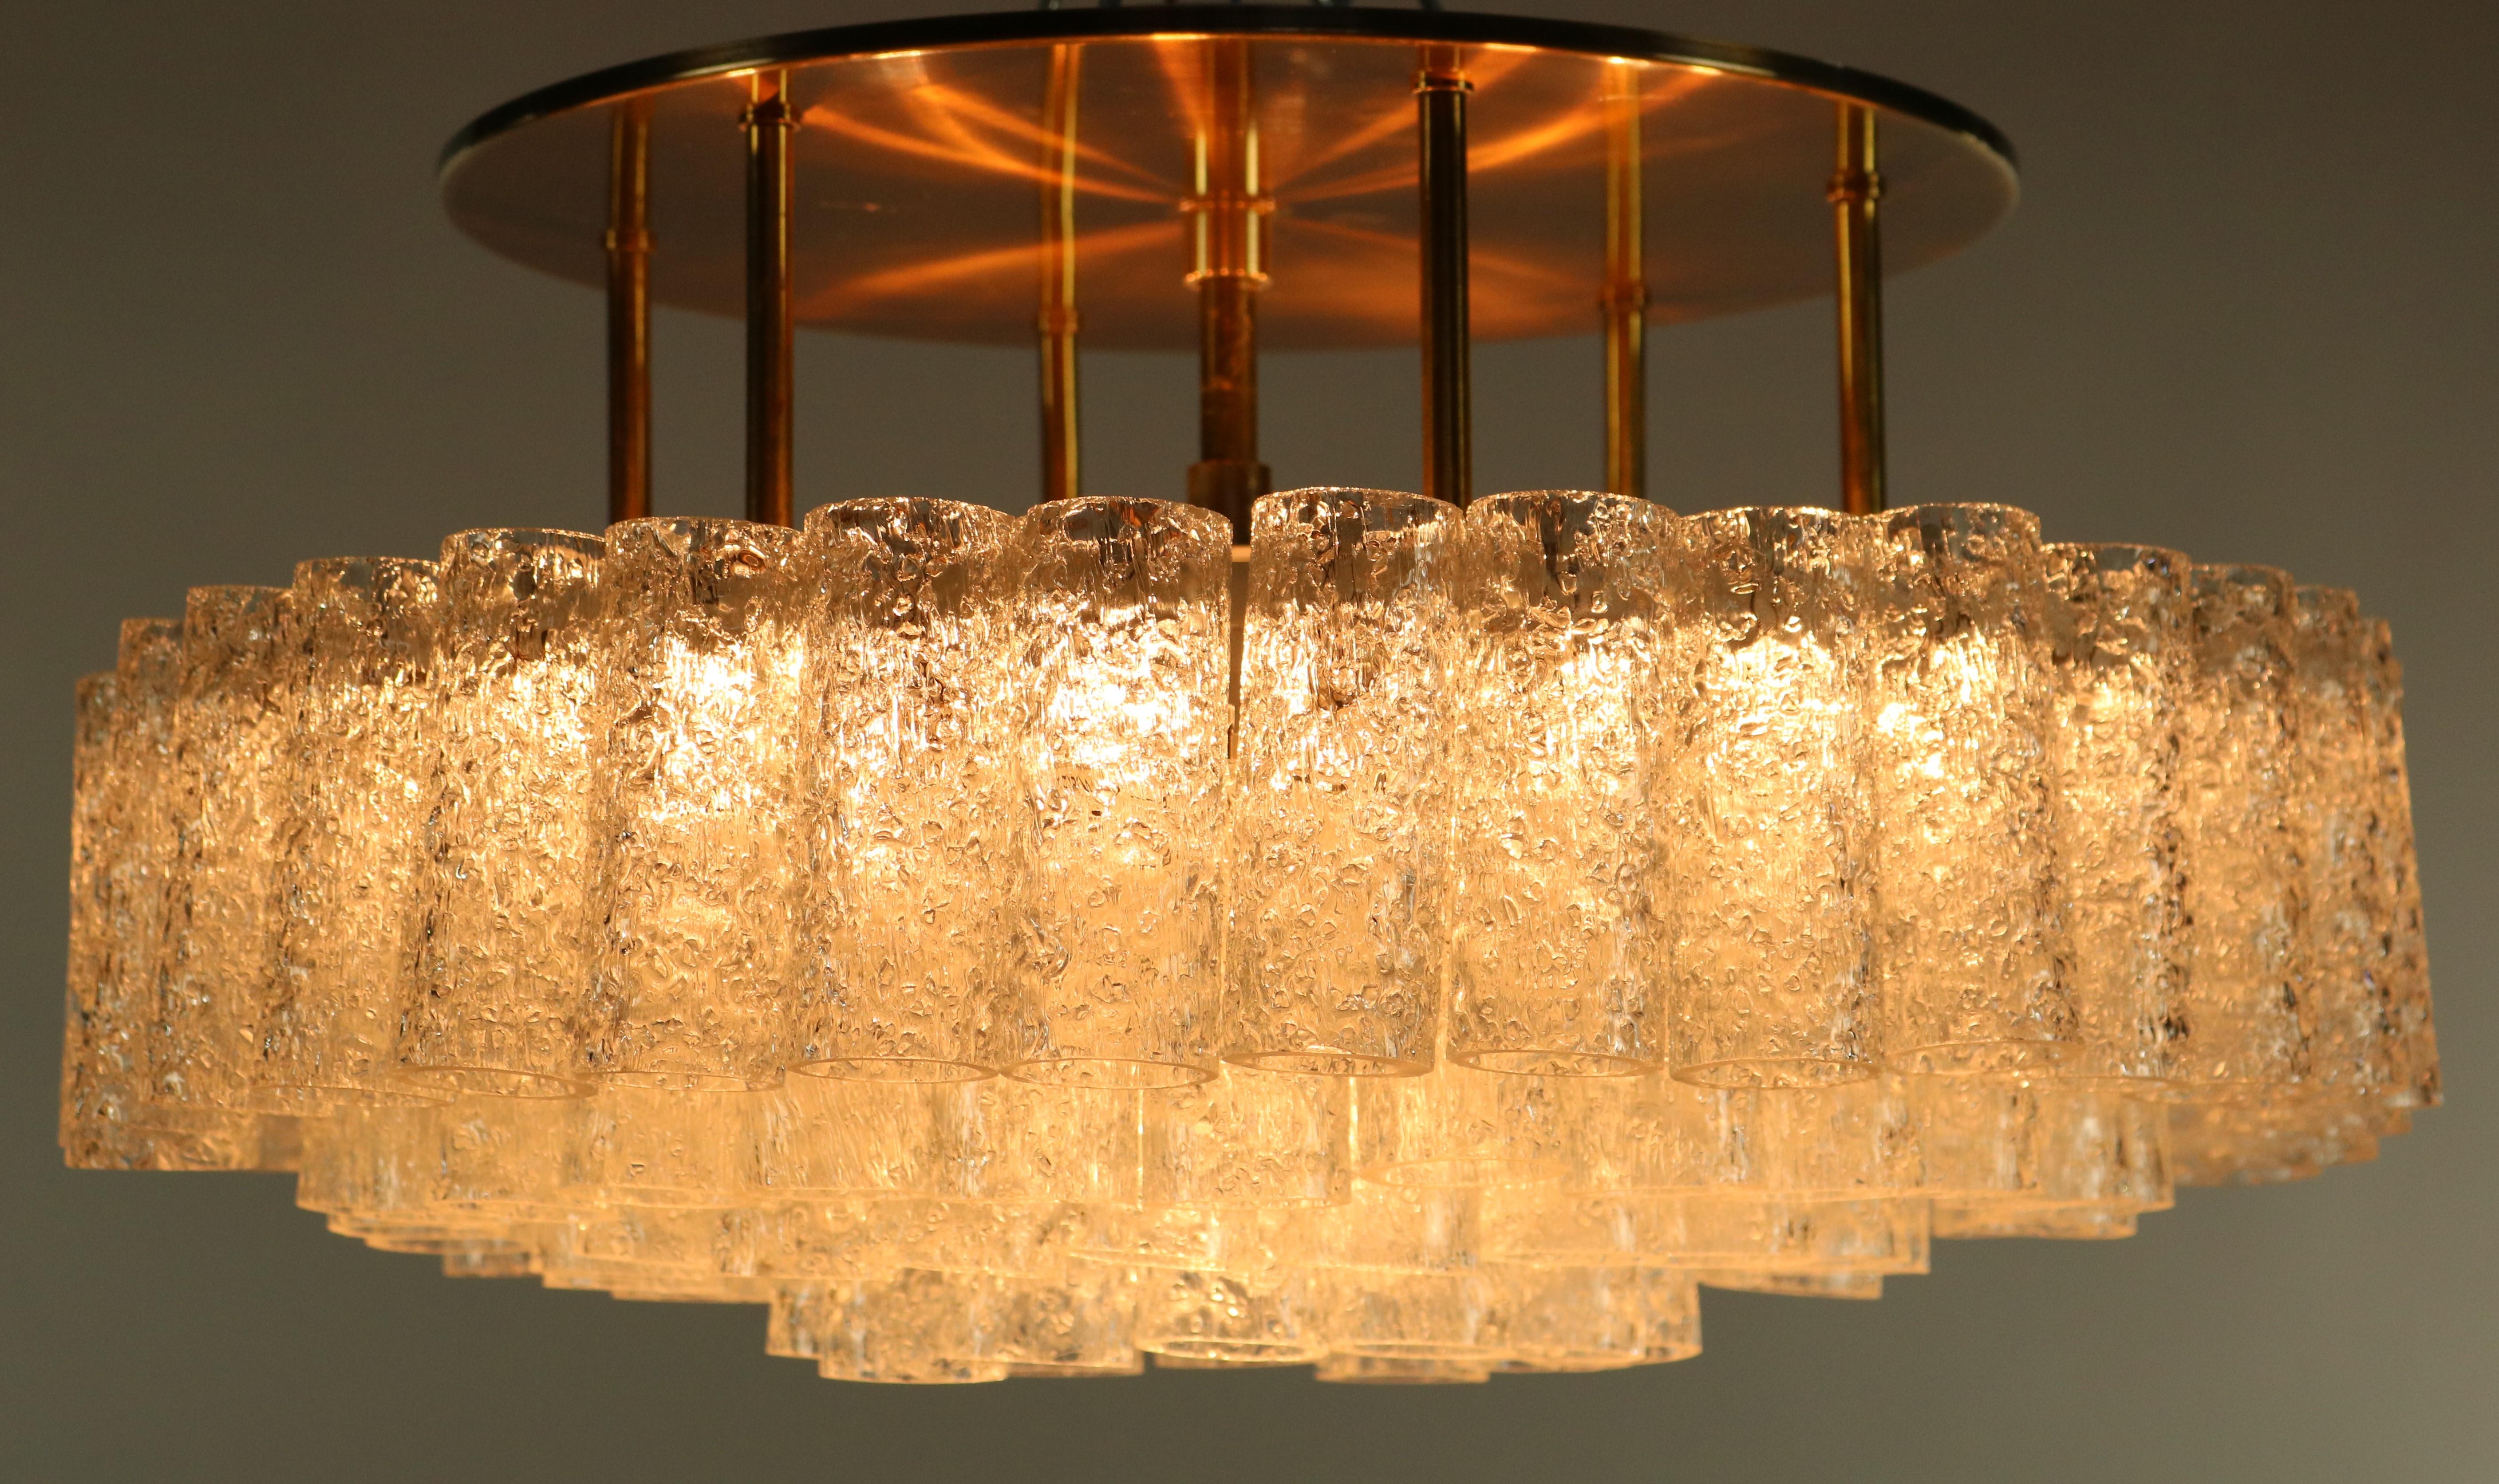 Doria ceiling fixture glass tube chandelier 
Complete with 97 glass tubes 
in four rows and a larger one in the middle
Three rows of tubes 12 pieces + 20 pieces +28 pieces with 3.2